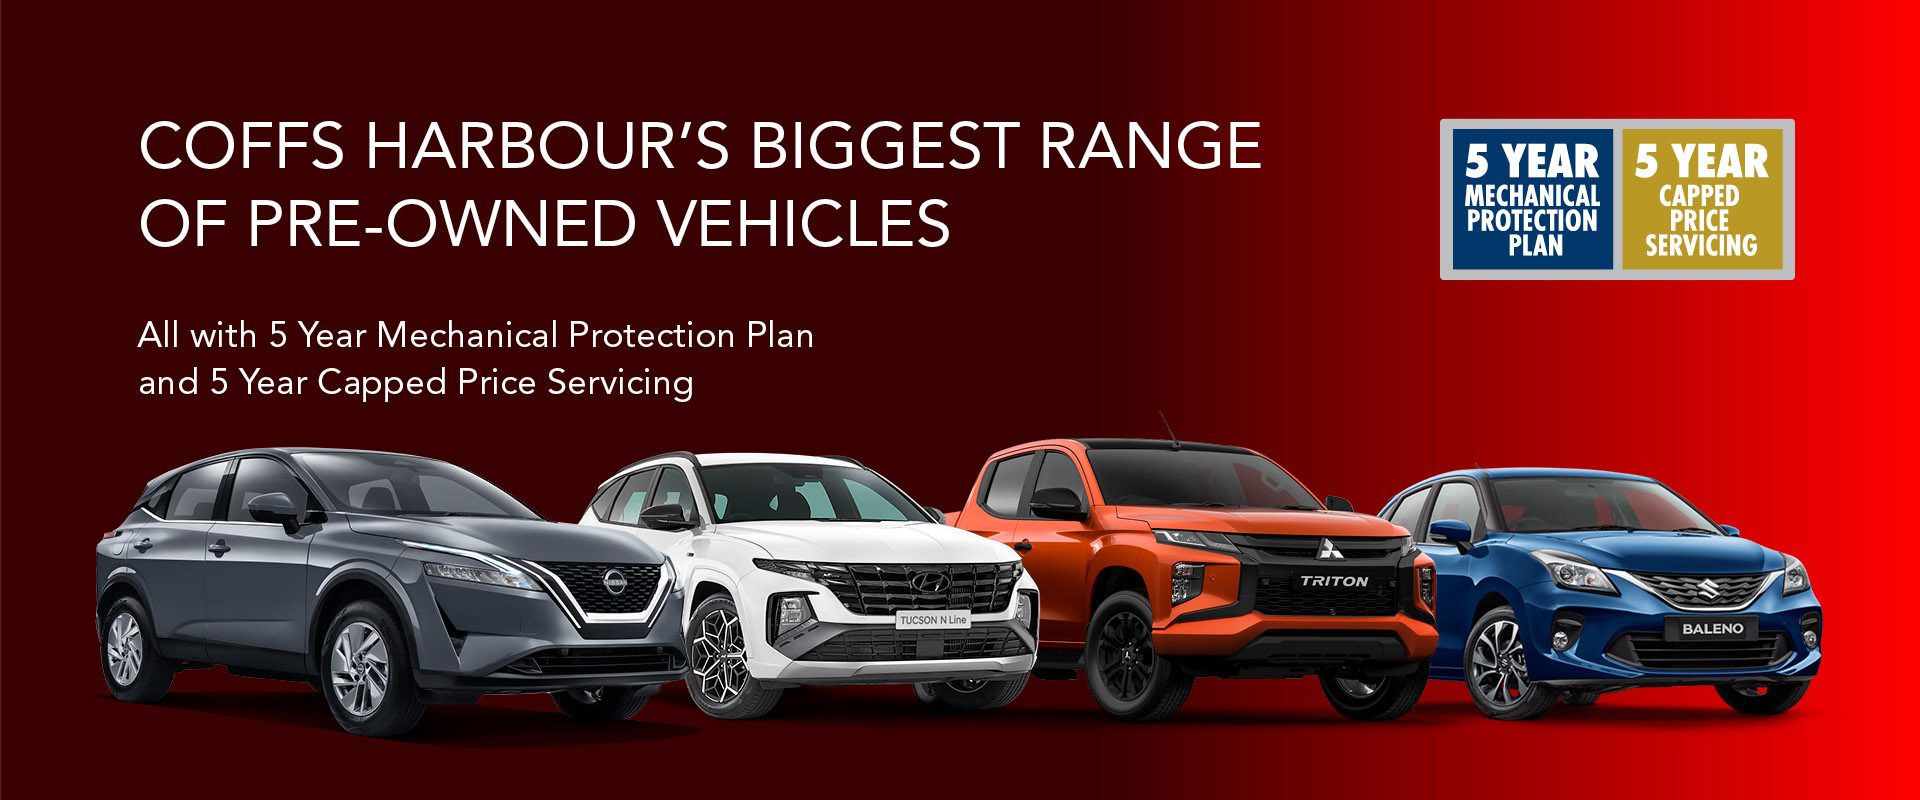 Coffs Harbour's Biggest Range of Pre-Owned Vehicles